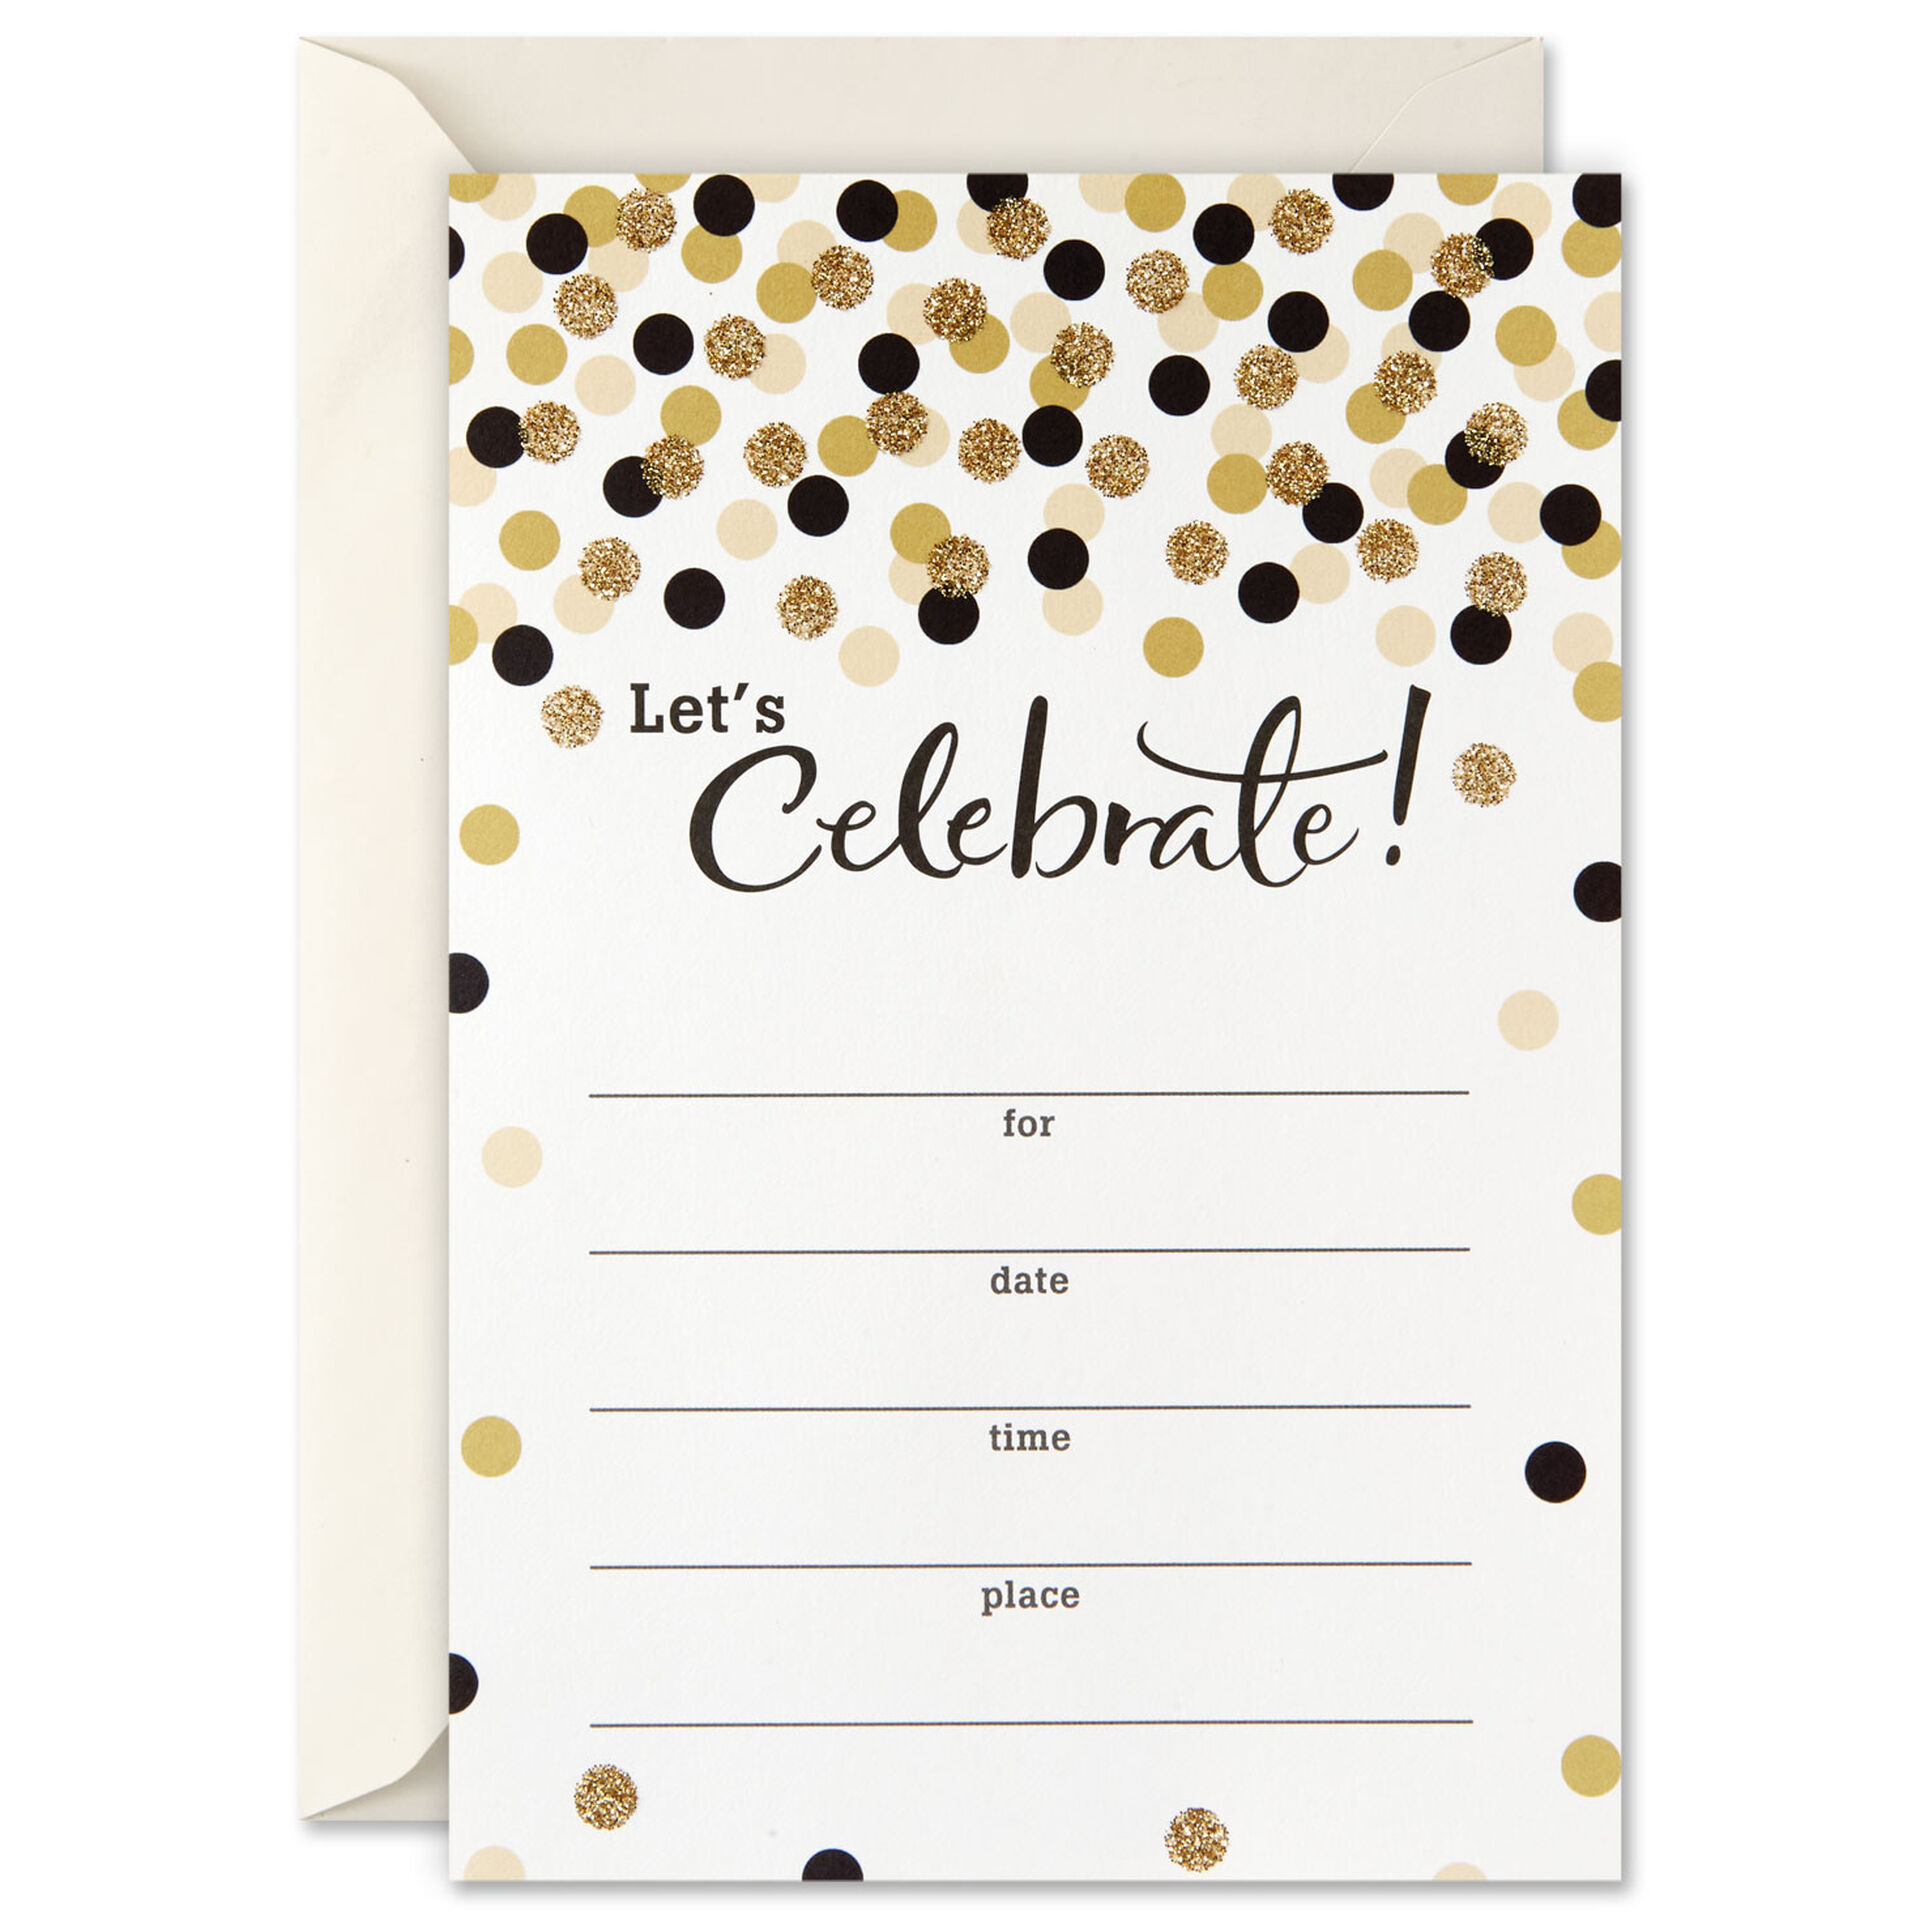 Lets-Celebrate-Gold-Dots-Party-Invitations_799NCW1049_02